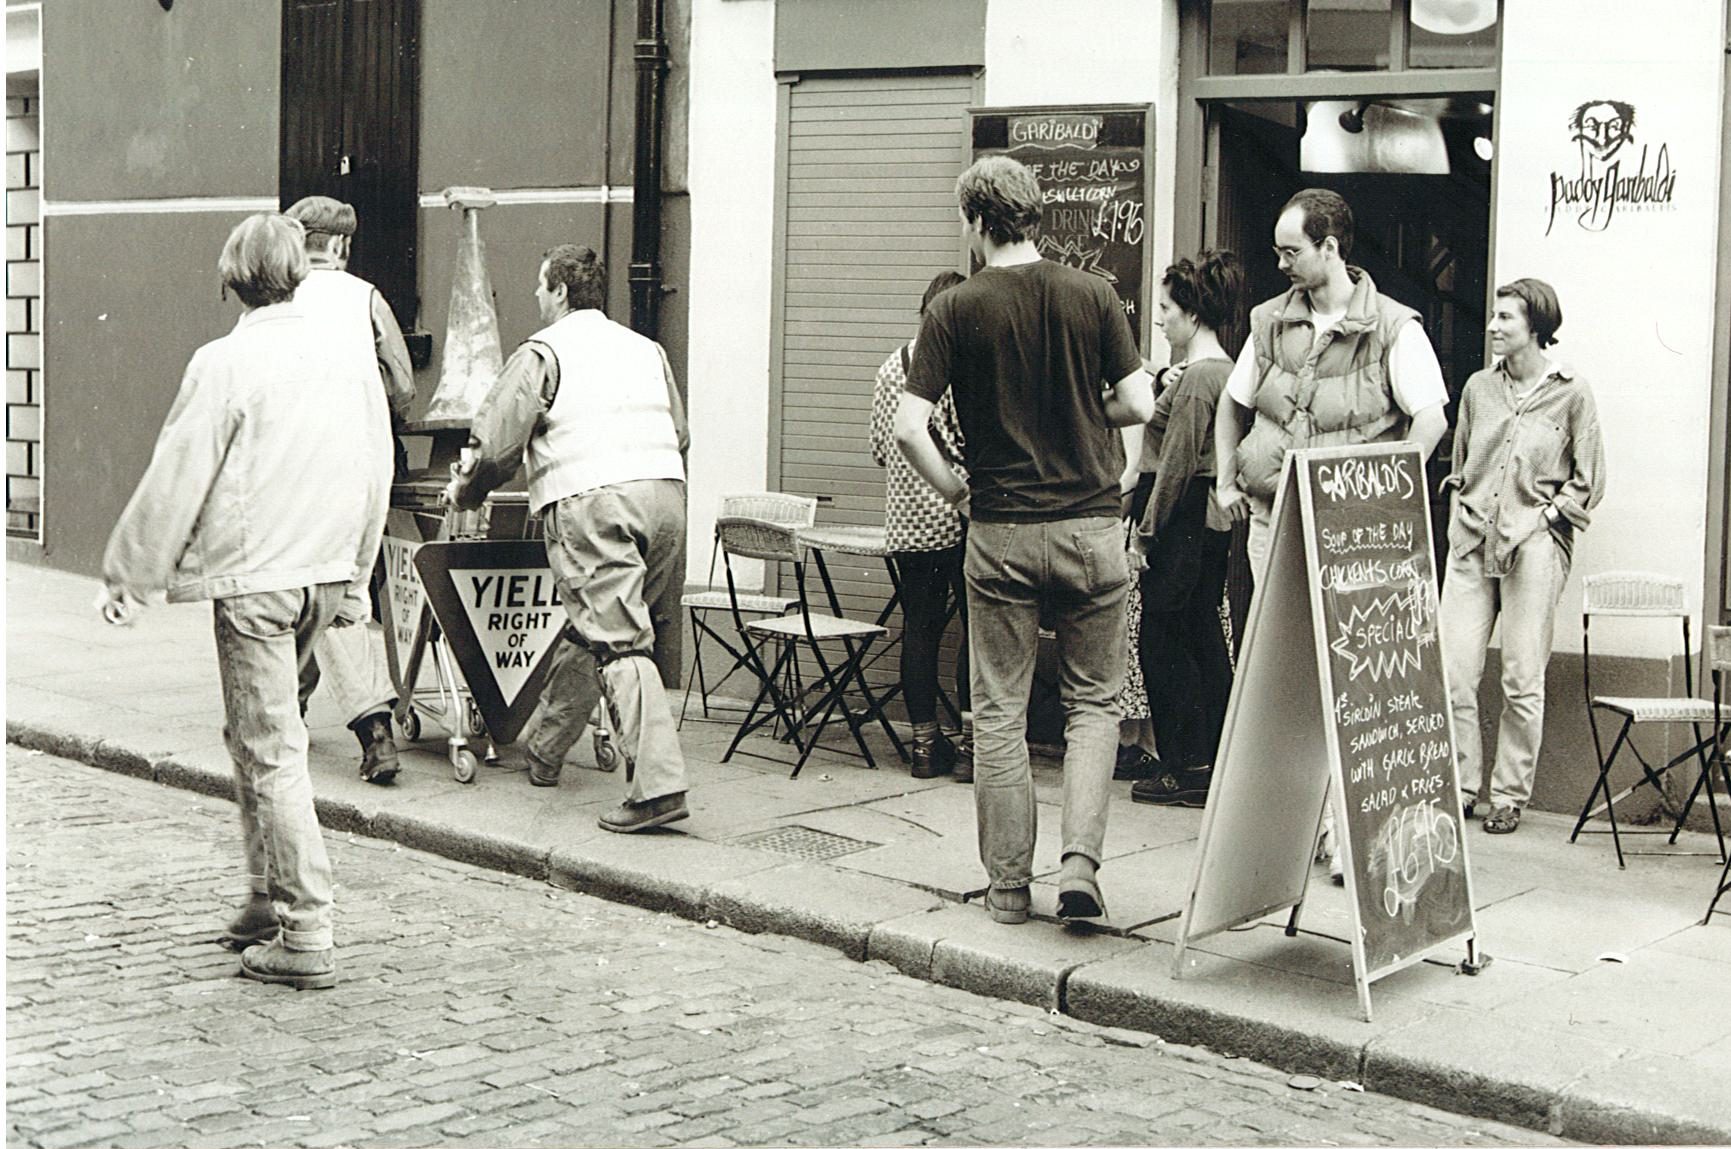 Maurice O’Connell and Brian Connolly (aka Desert Rats), durational performance drawing a red dotted line around the Temple Bar district in Dublin city centre (1994), photographs by Annette Hennessy, National Irish Visual Arts Library, Artsource Collection © the artists